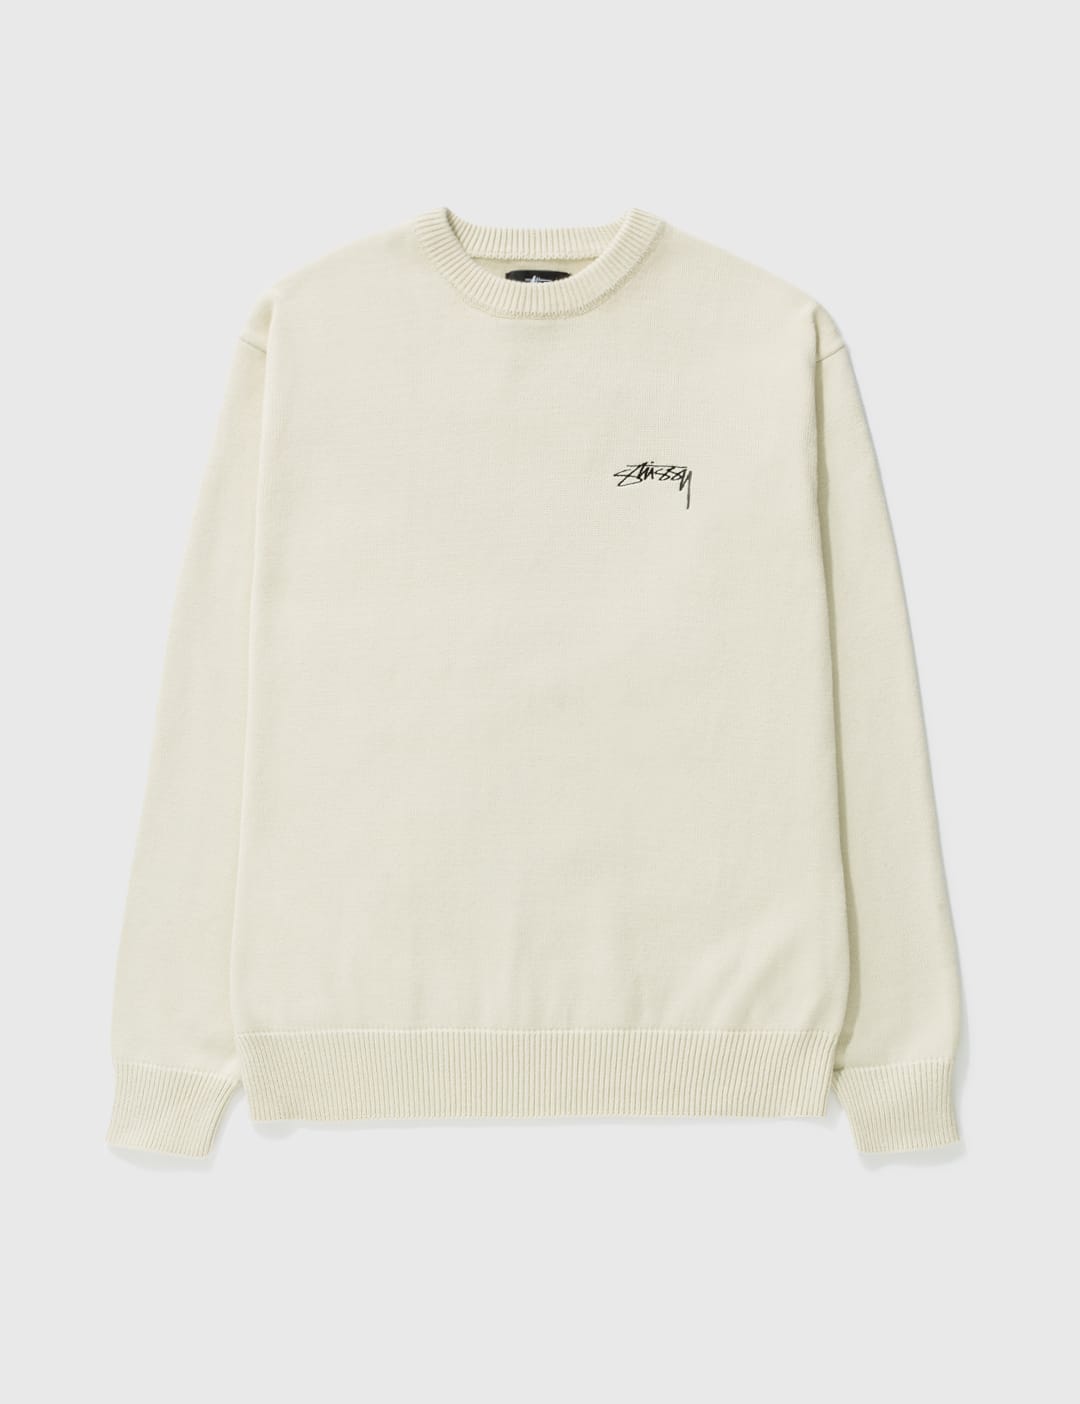 Stüssy - CARE LABEL SWEATER | HBX - Globally Curated Fashion and 